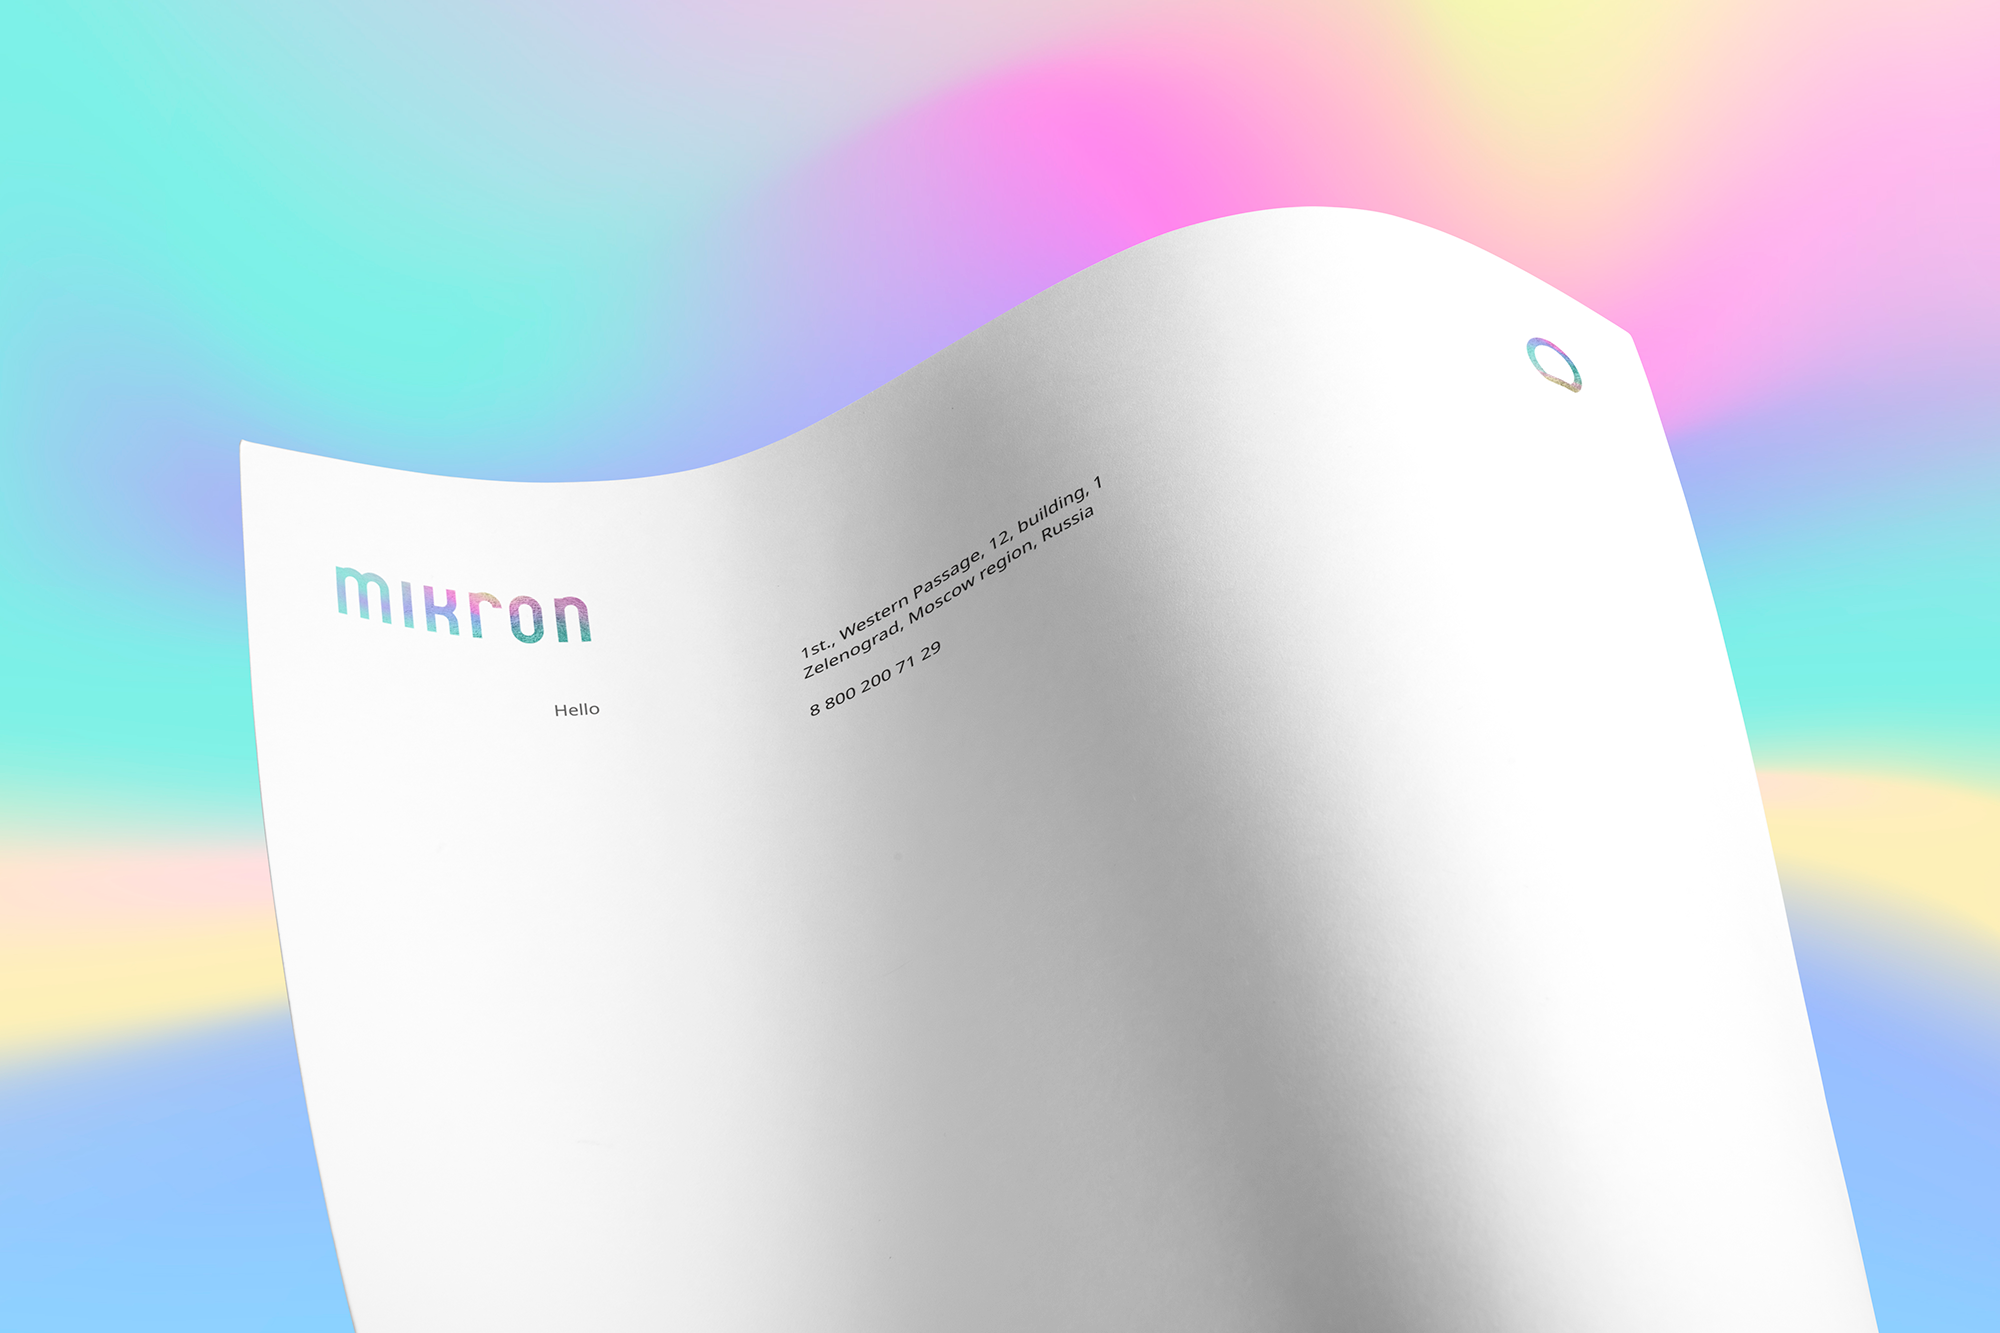 Brand Identity for Mikron, a leading microelectronic enterprise in Europe